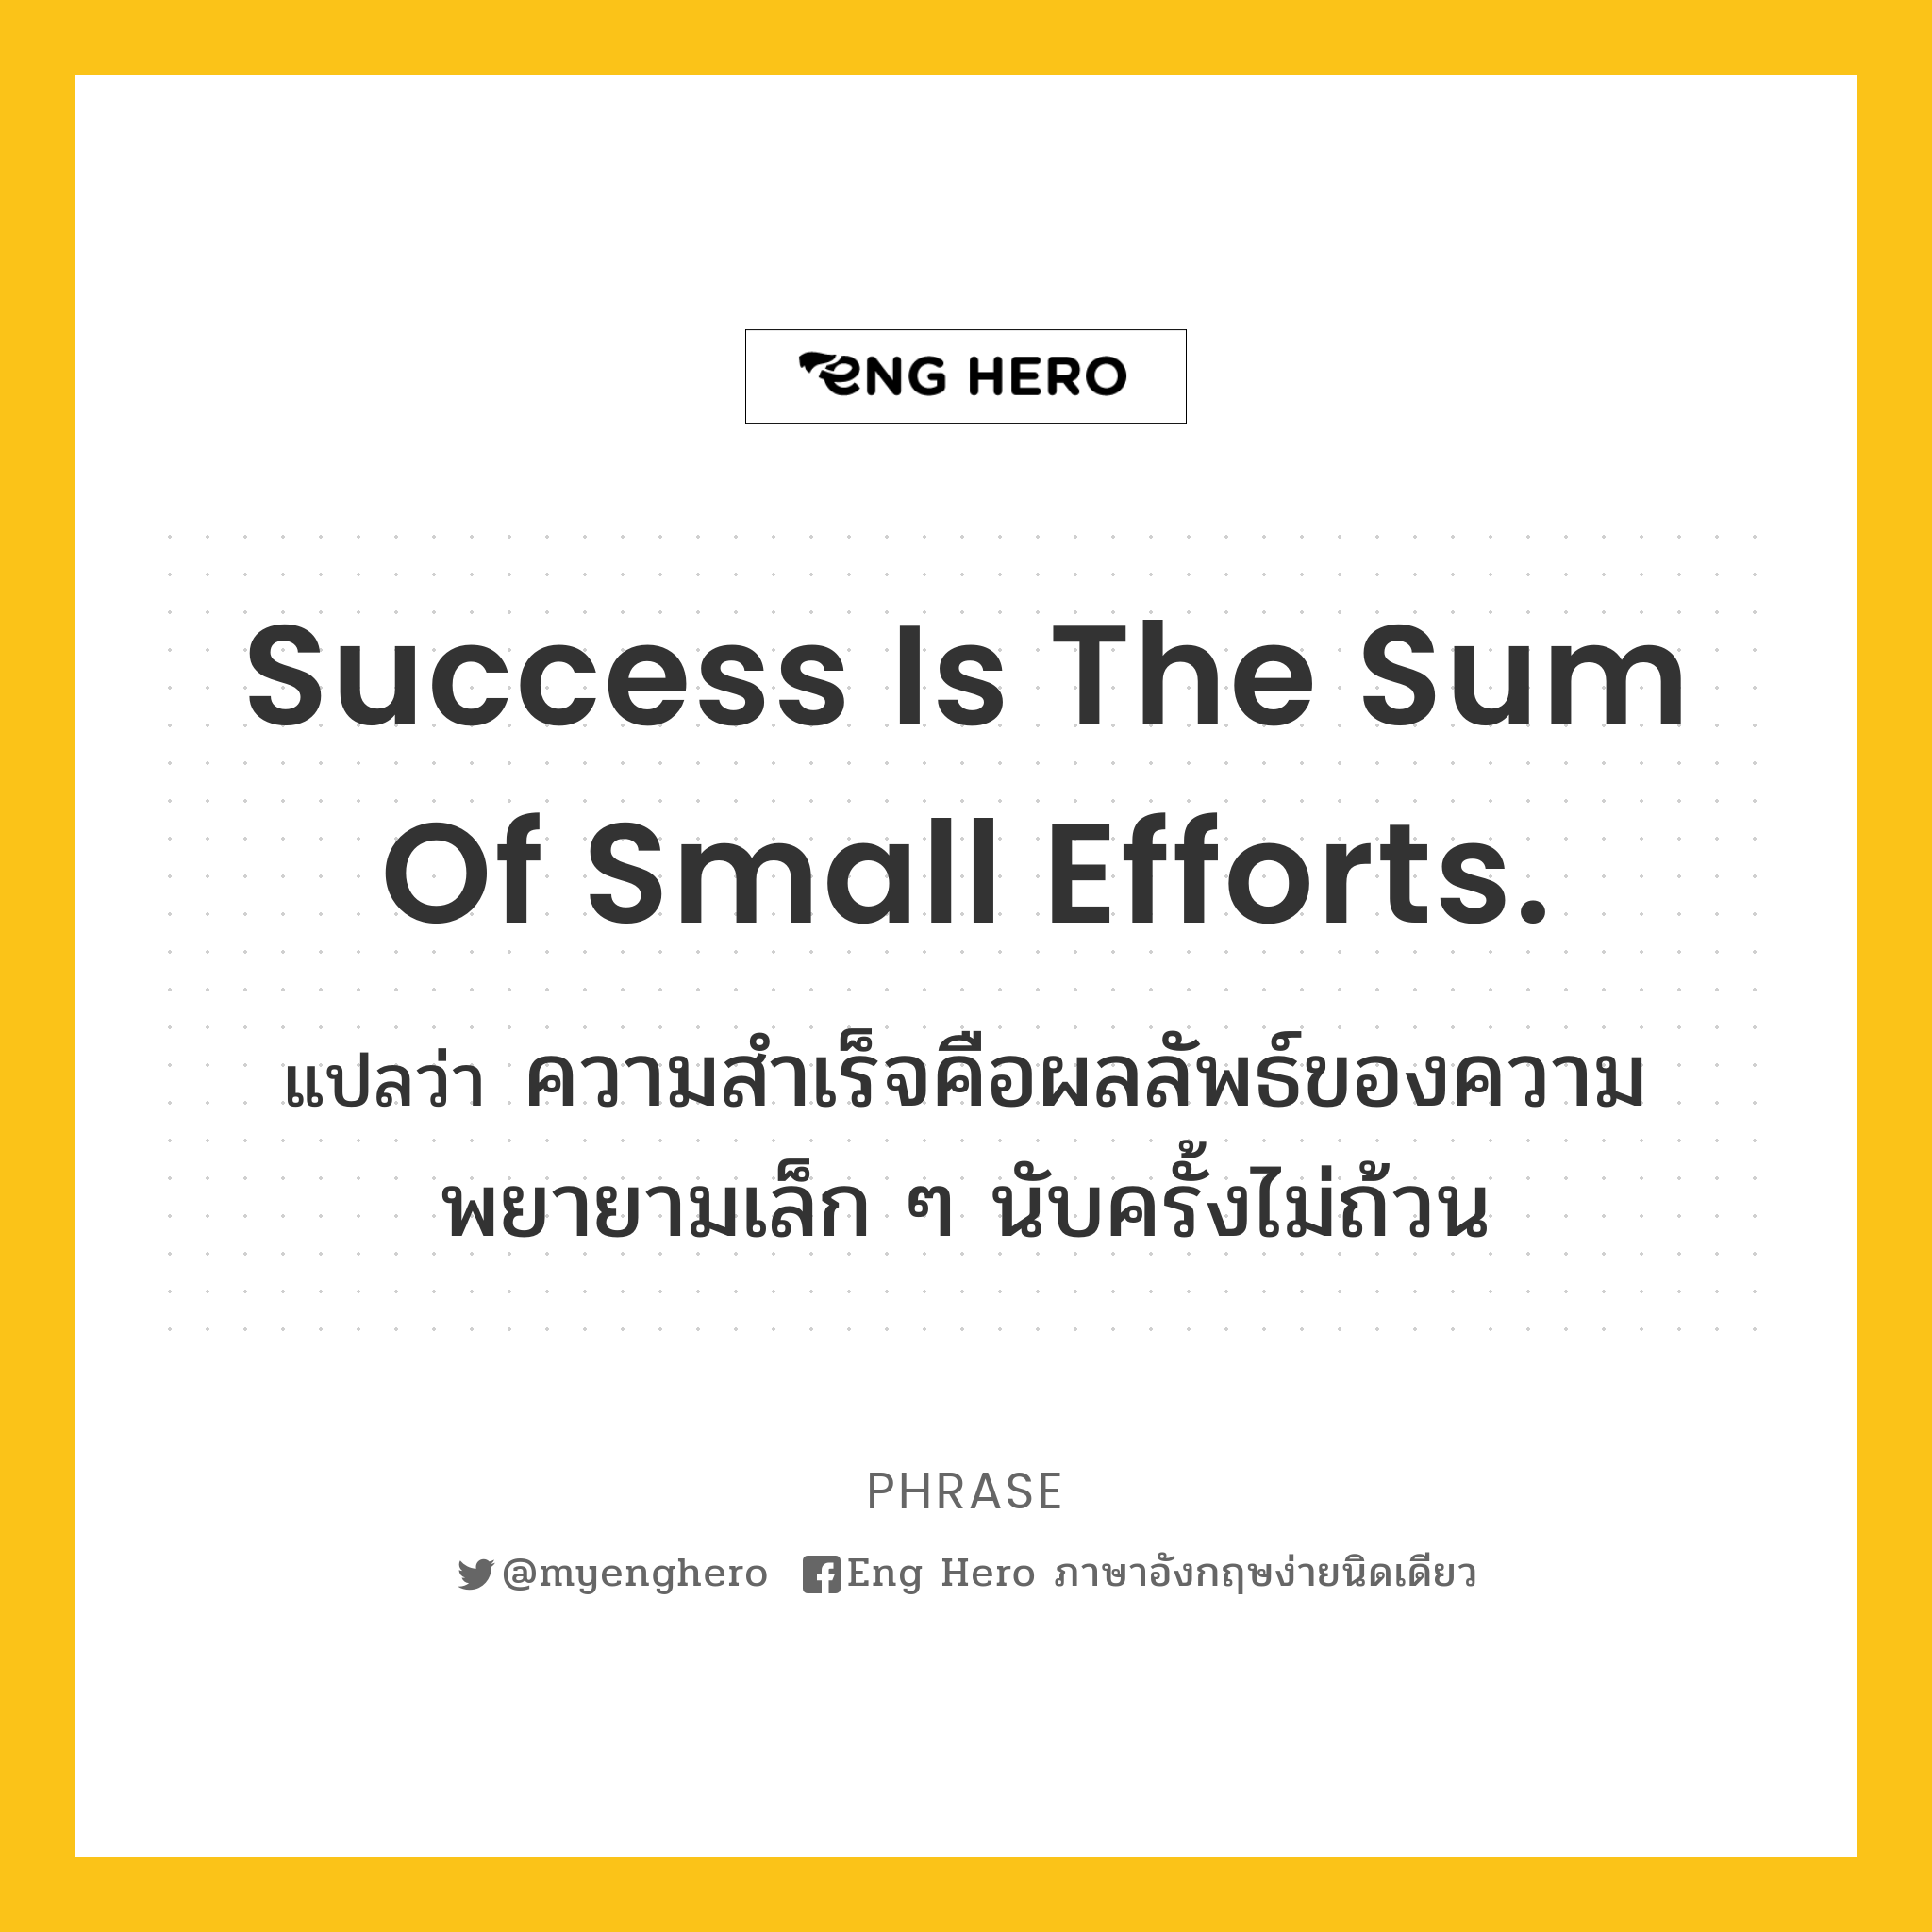 Success is the sum of small efforts.